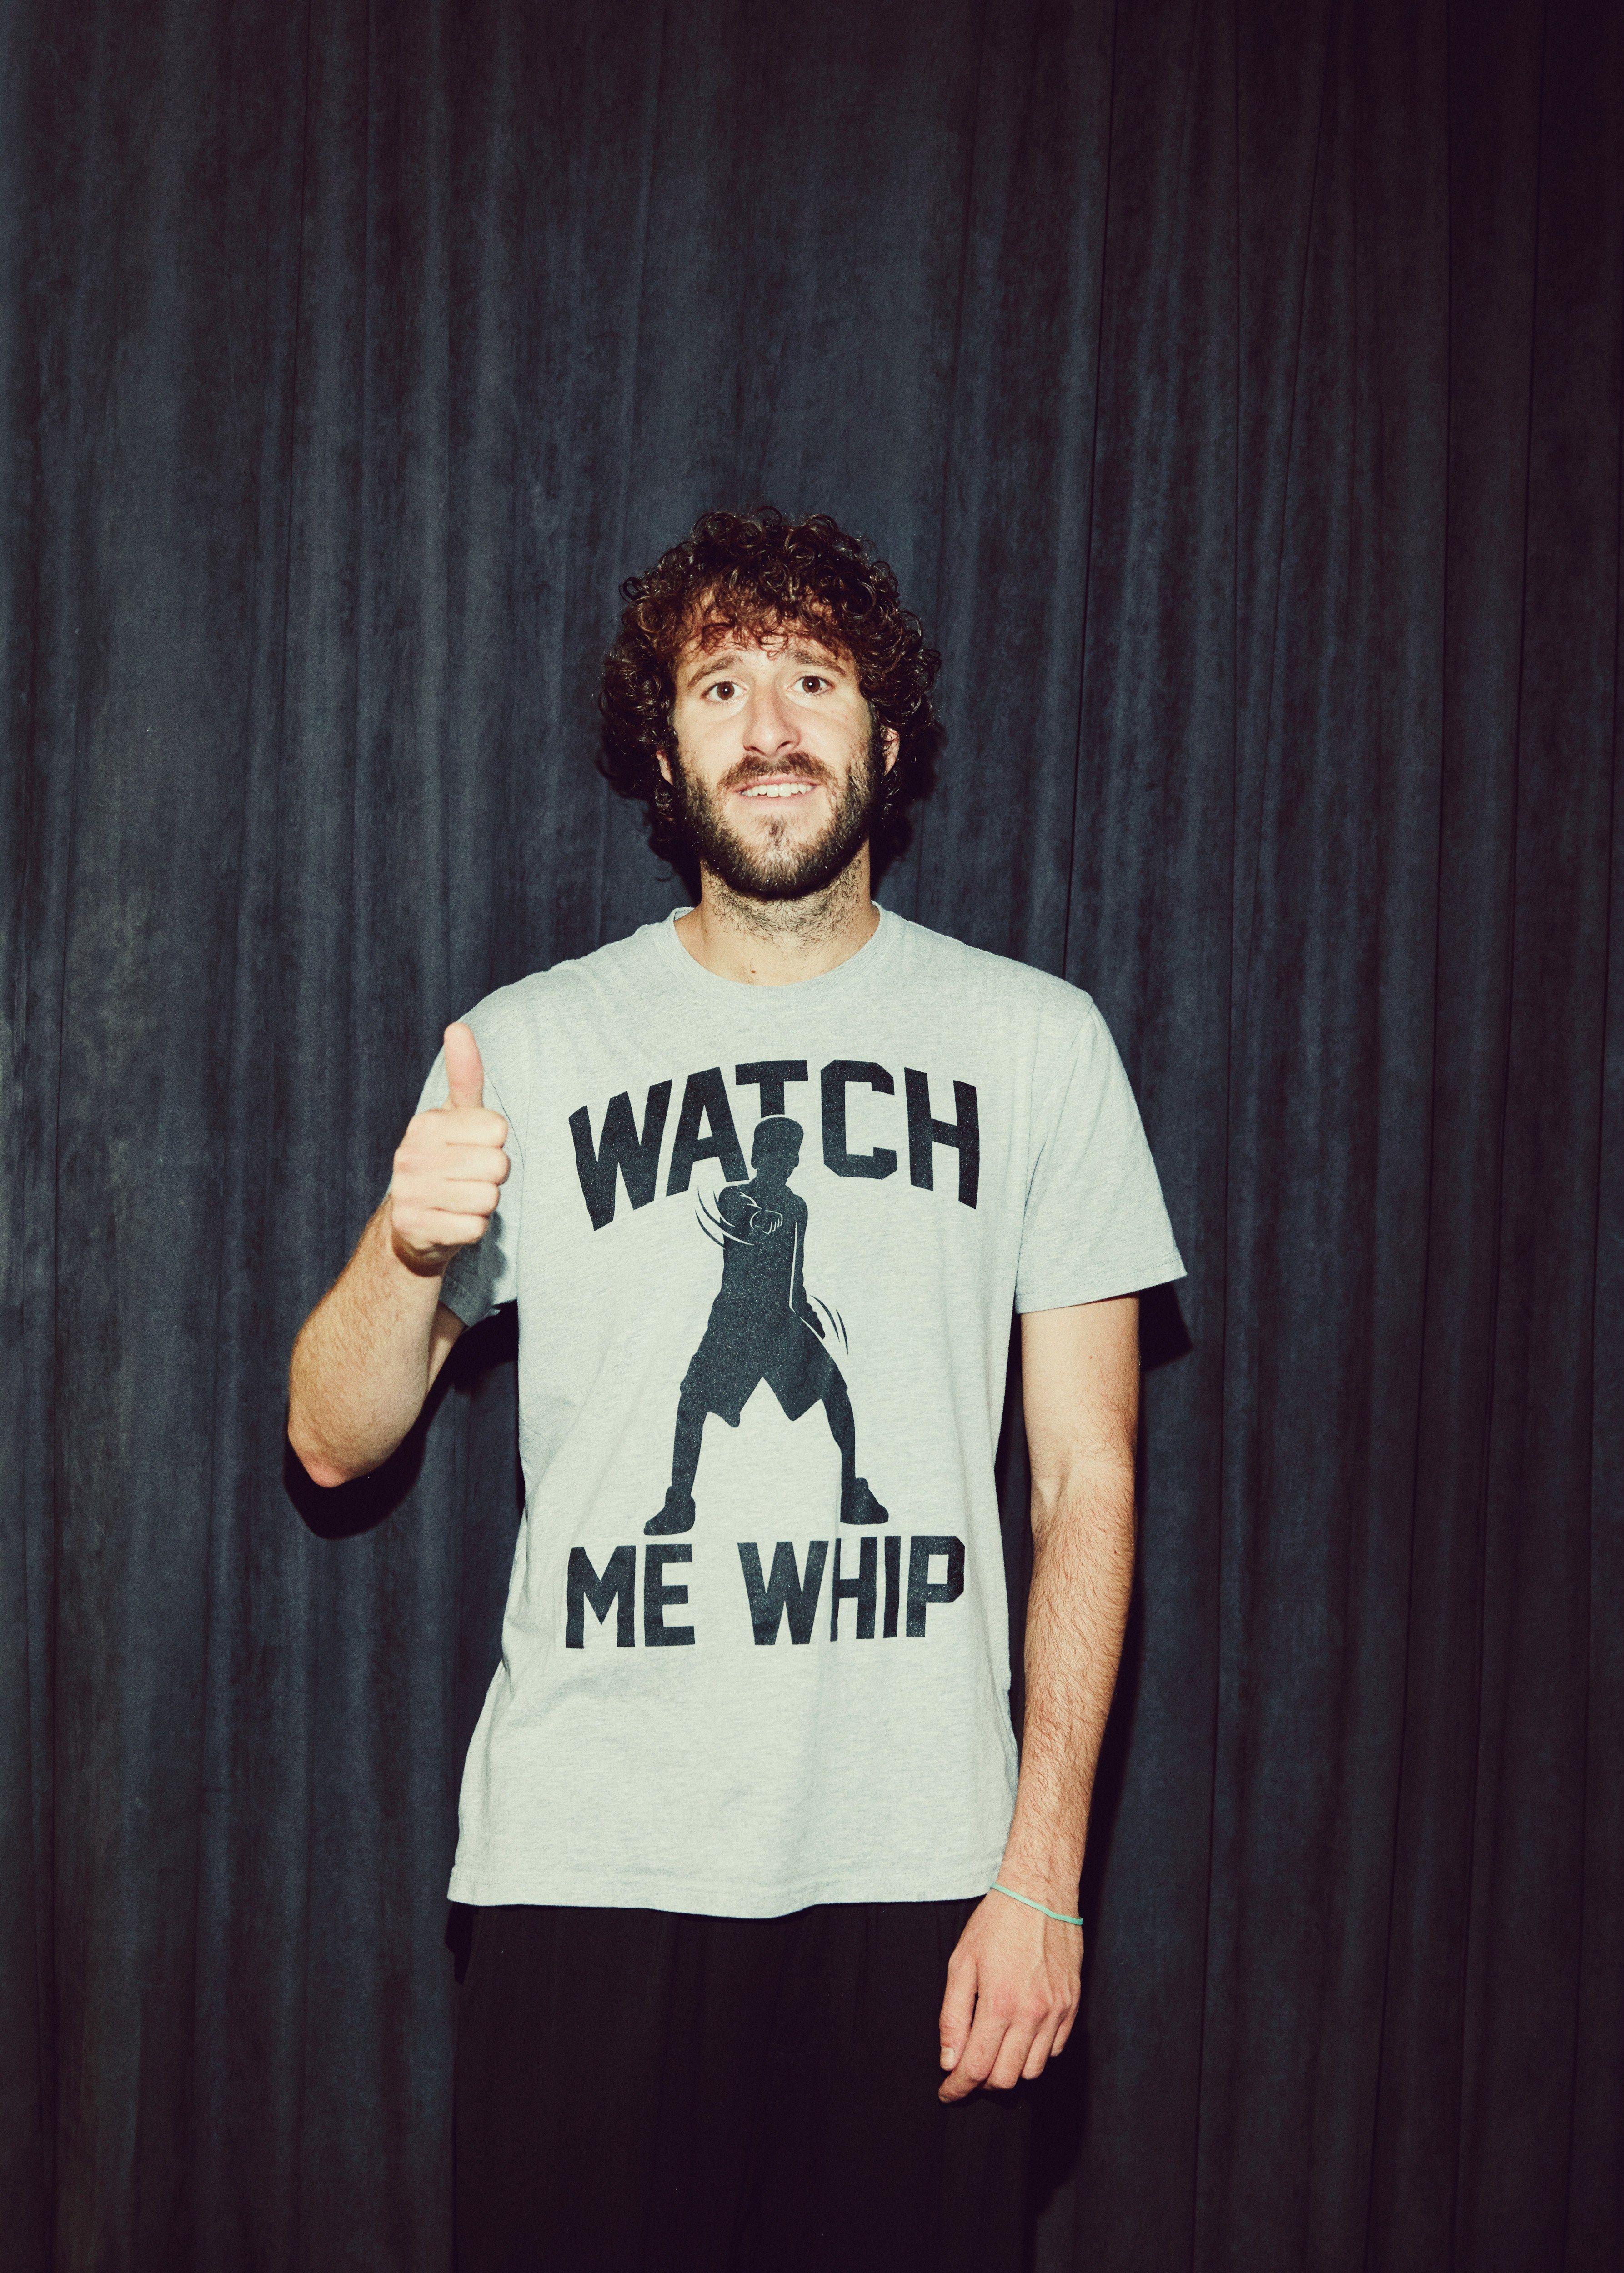 It's Time to Take Lil Dicky, Hip Hop's Goofball, Seriously